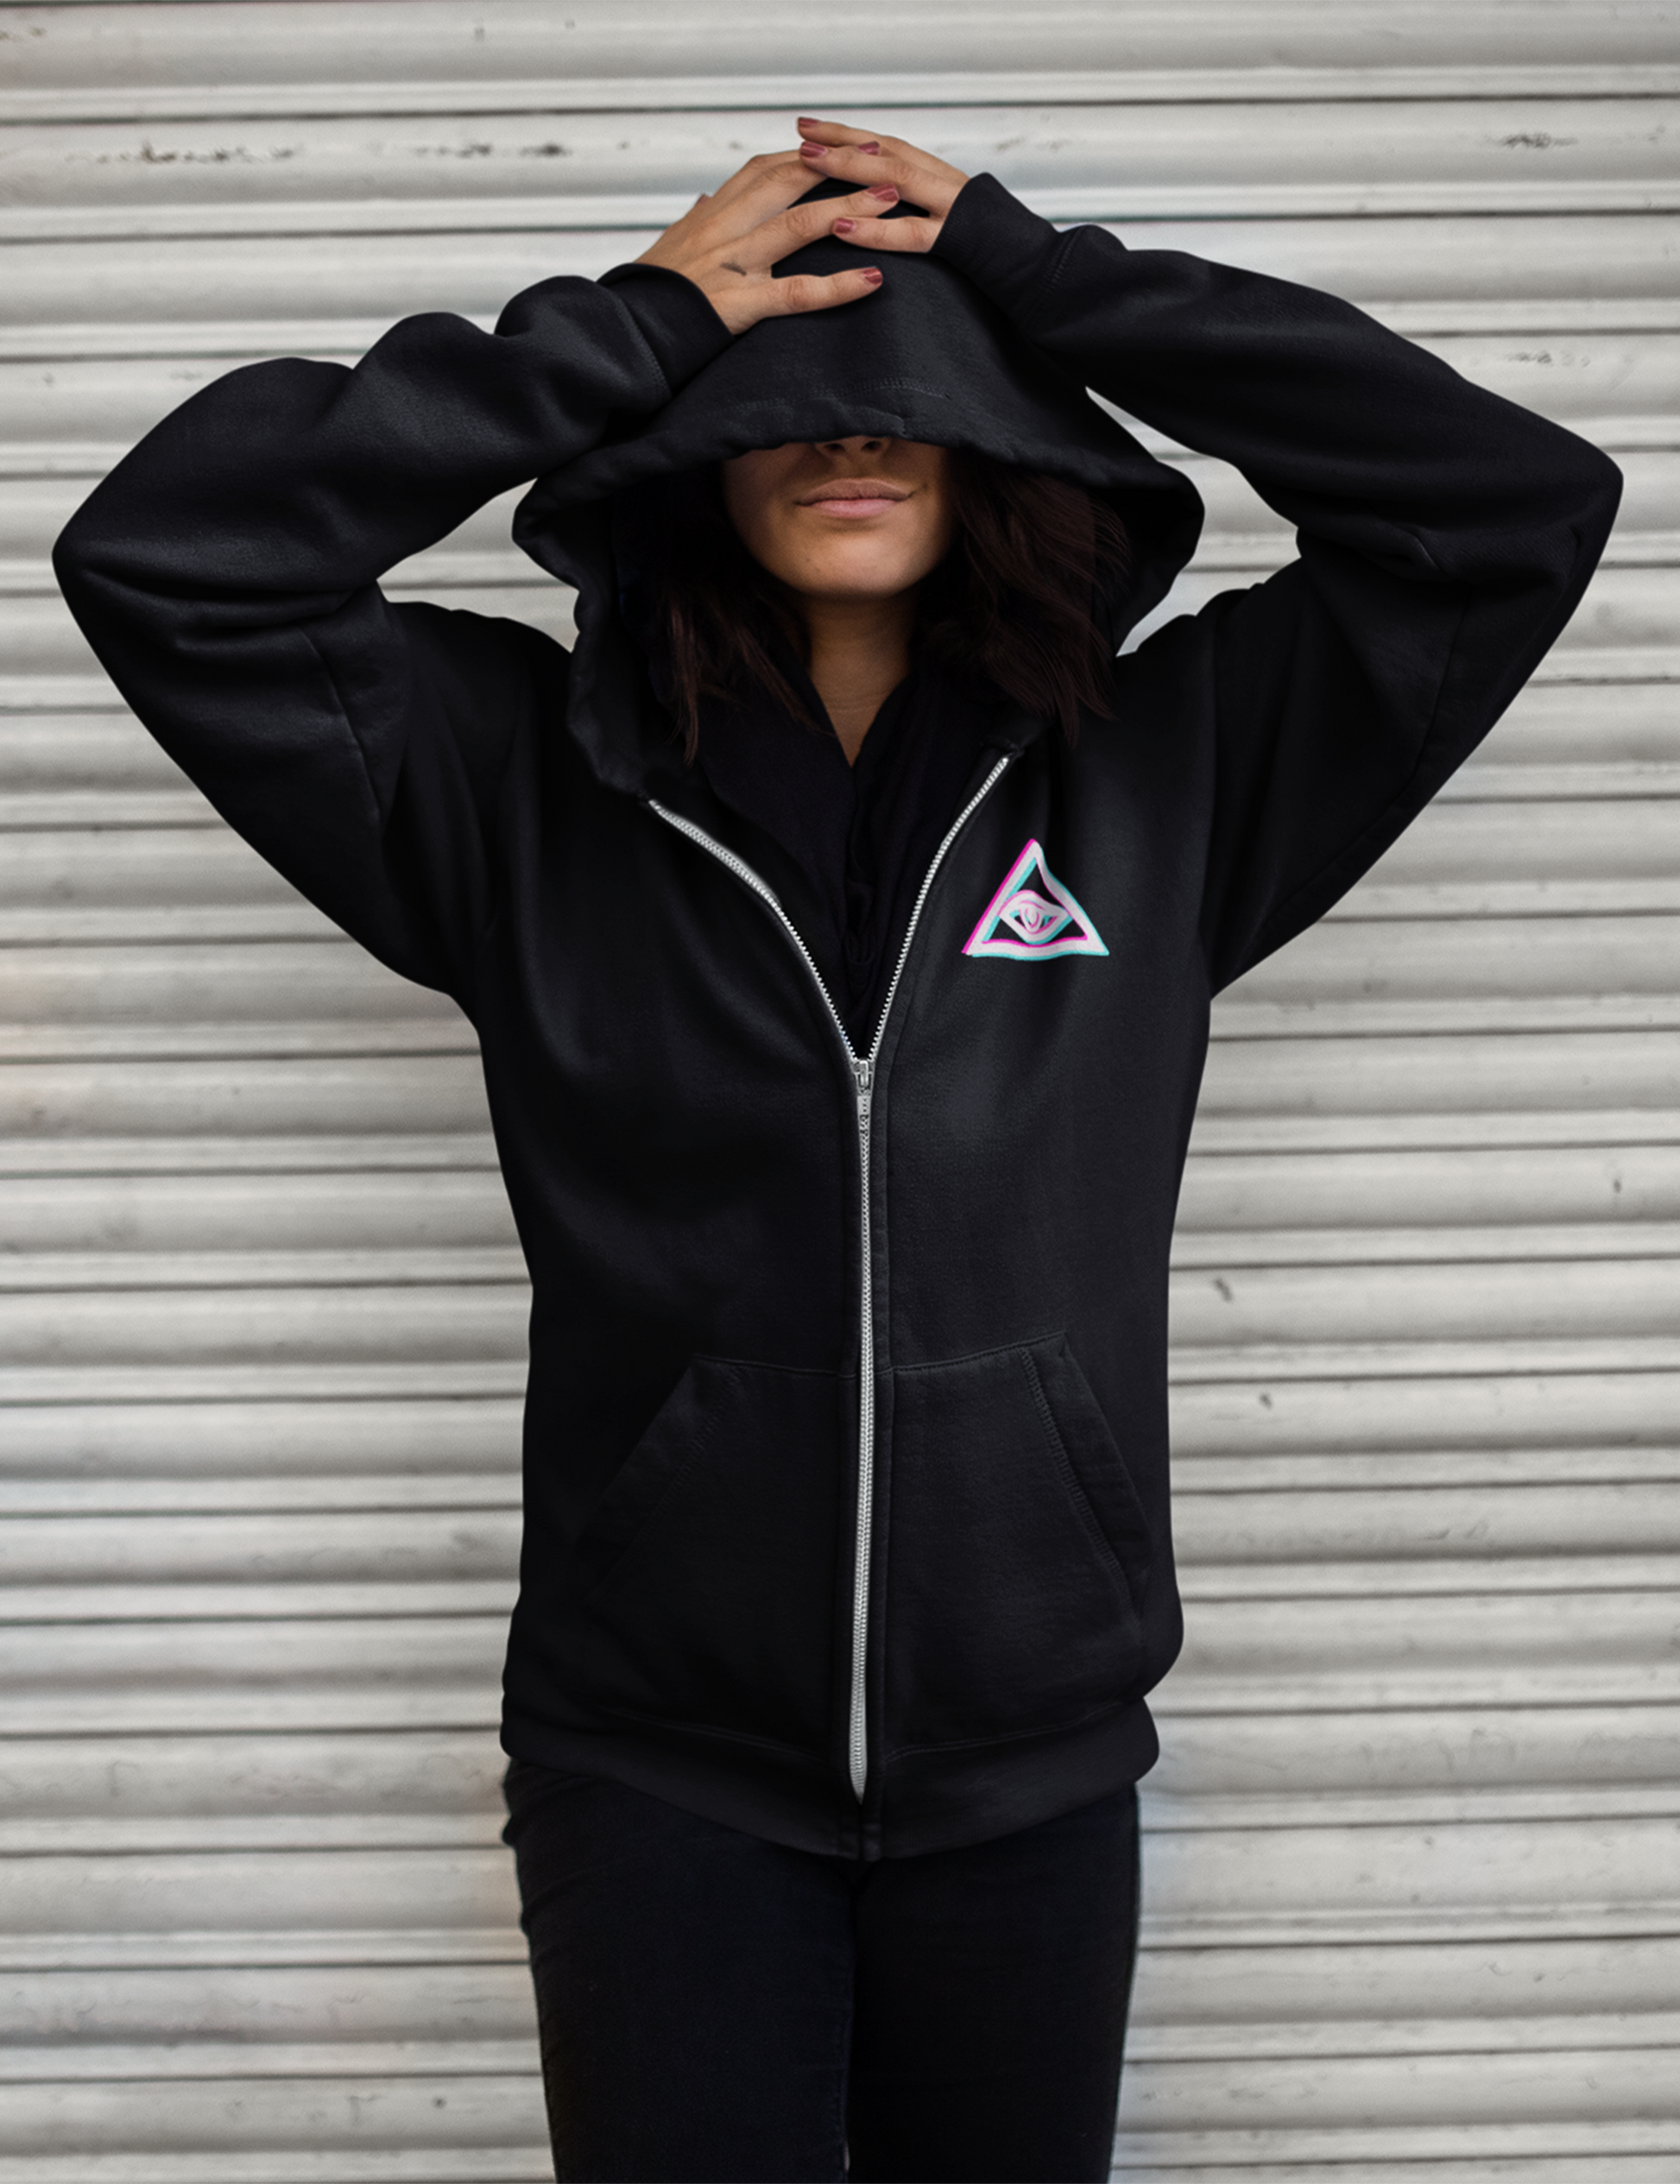 Goth Glitch Occult Symbols Plus Size Witchy Aesthetic Zip Up Hoodie